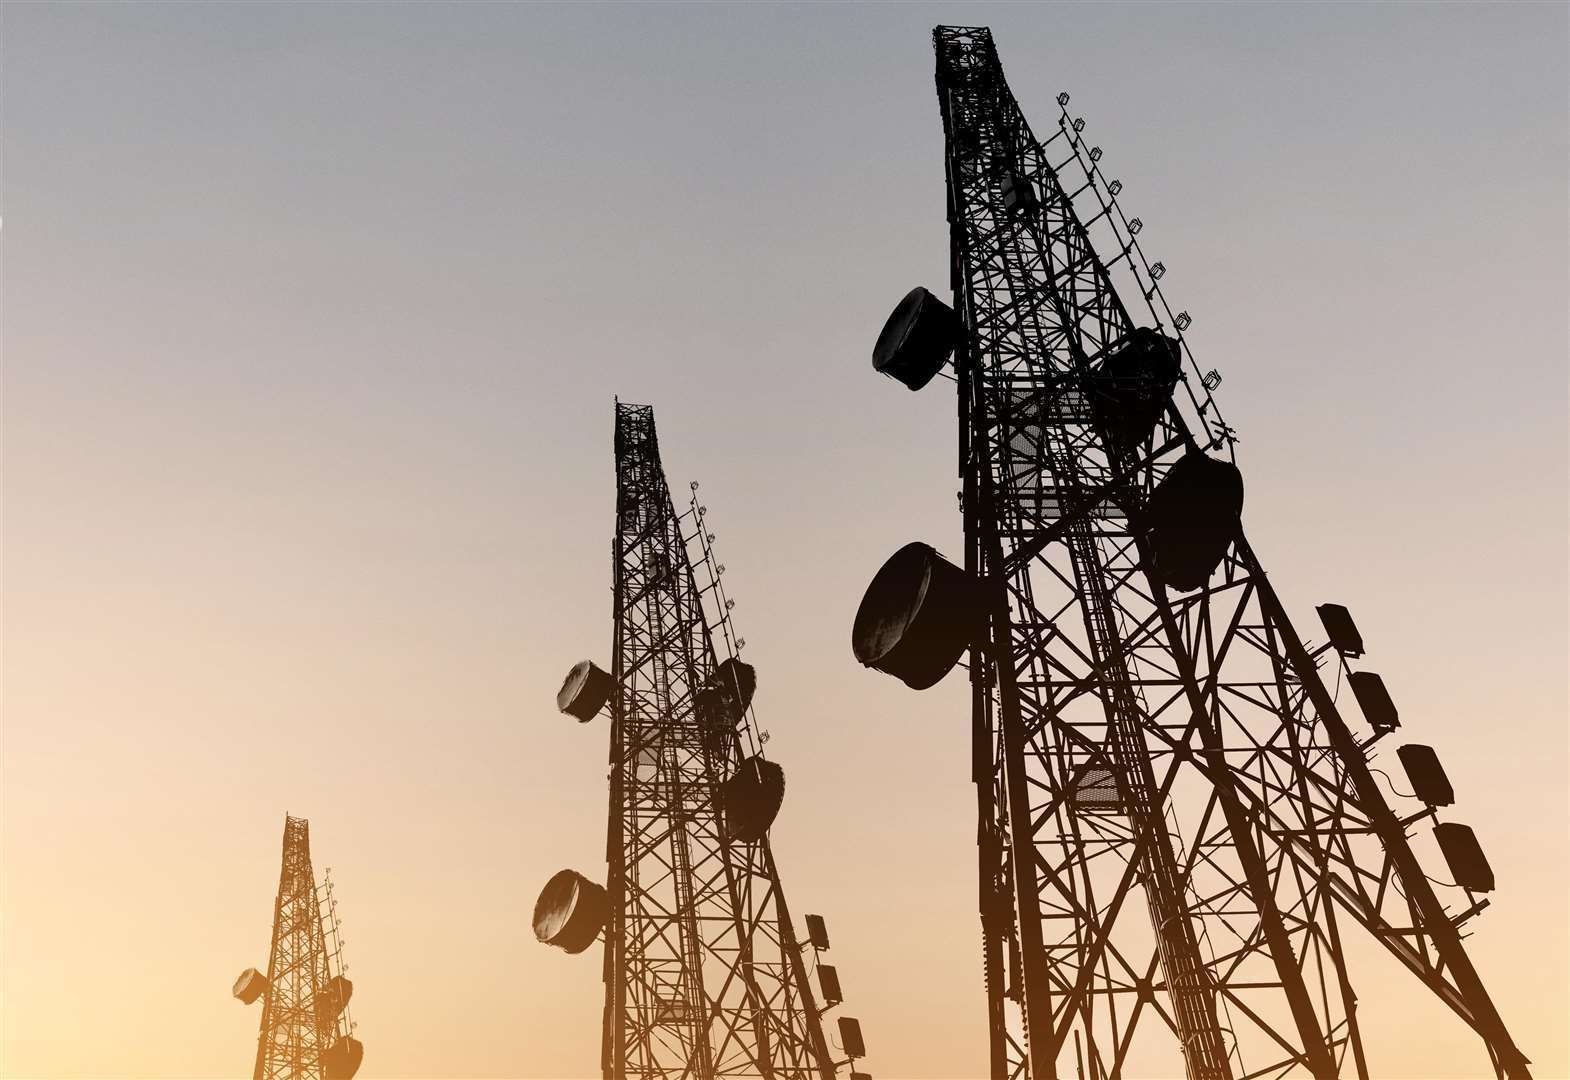 Phone masts will broadcast the alerts, the government doesn't need people's phone numbers